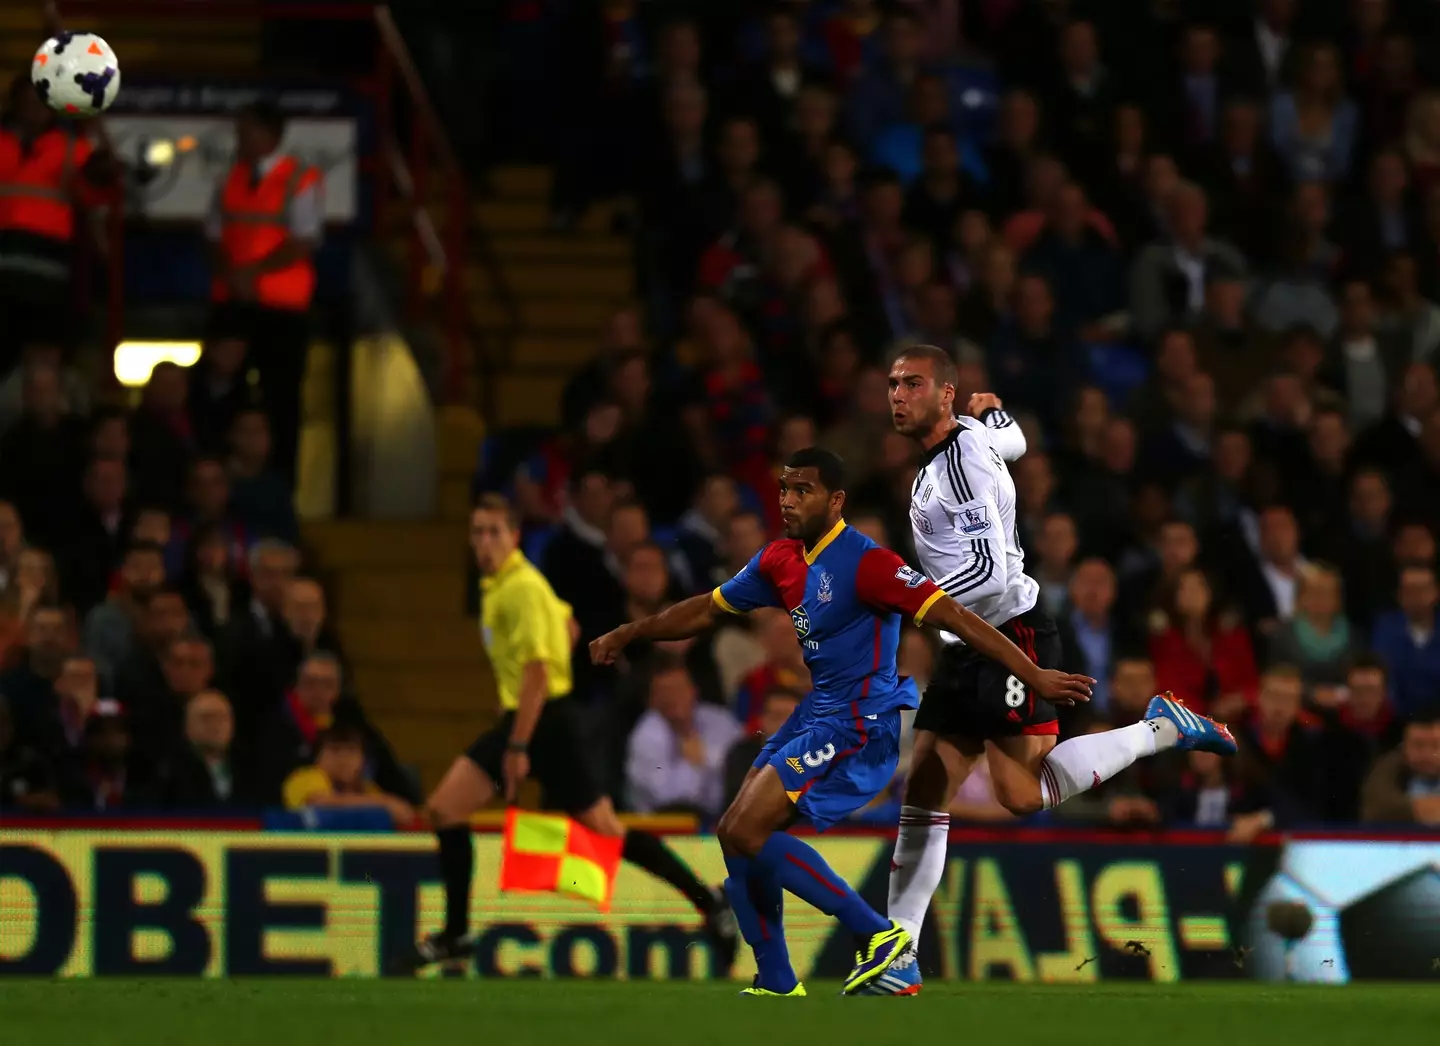 Pajtim Kasami in action for Fulham against Crystal Palace. Image: Getty